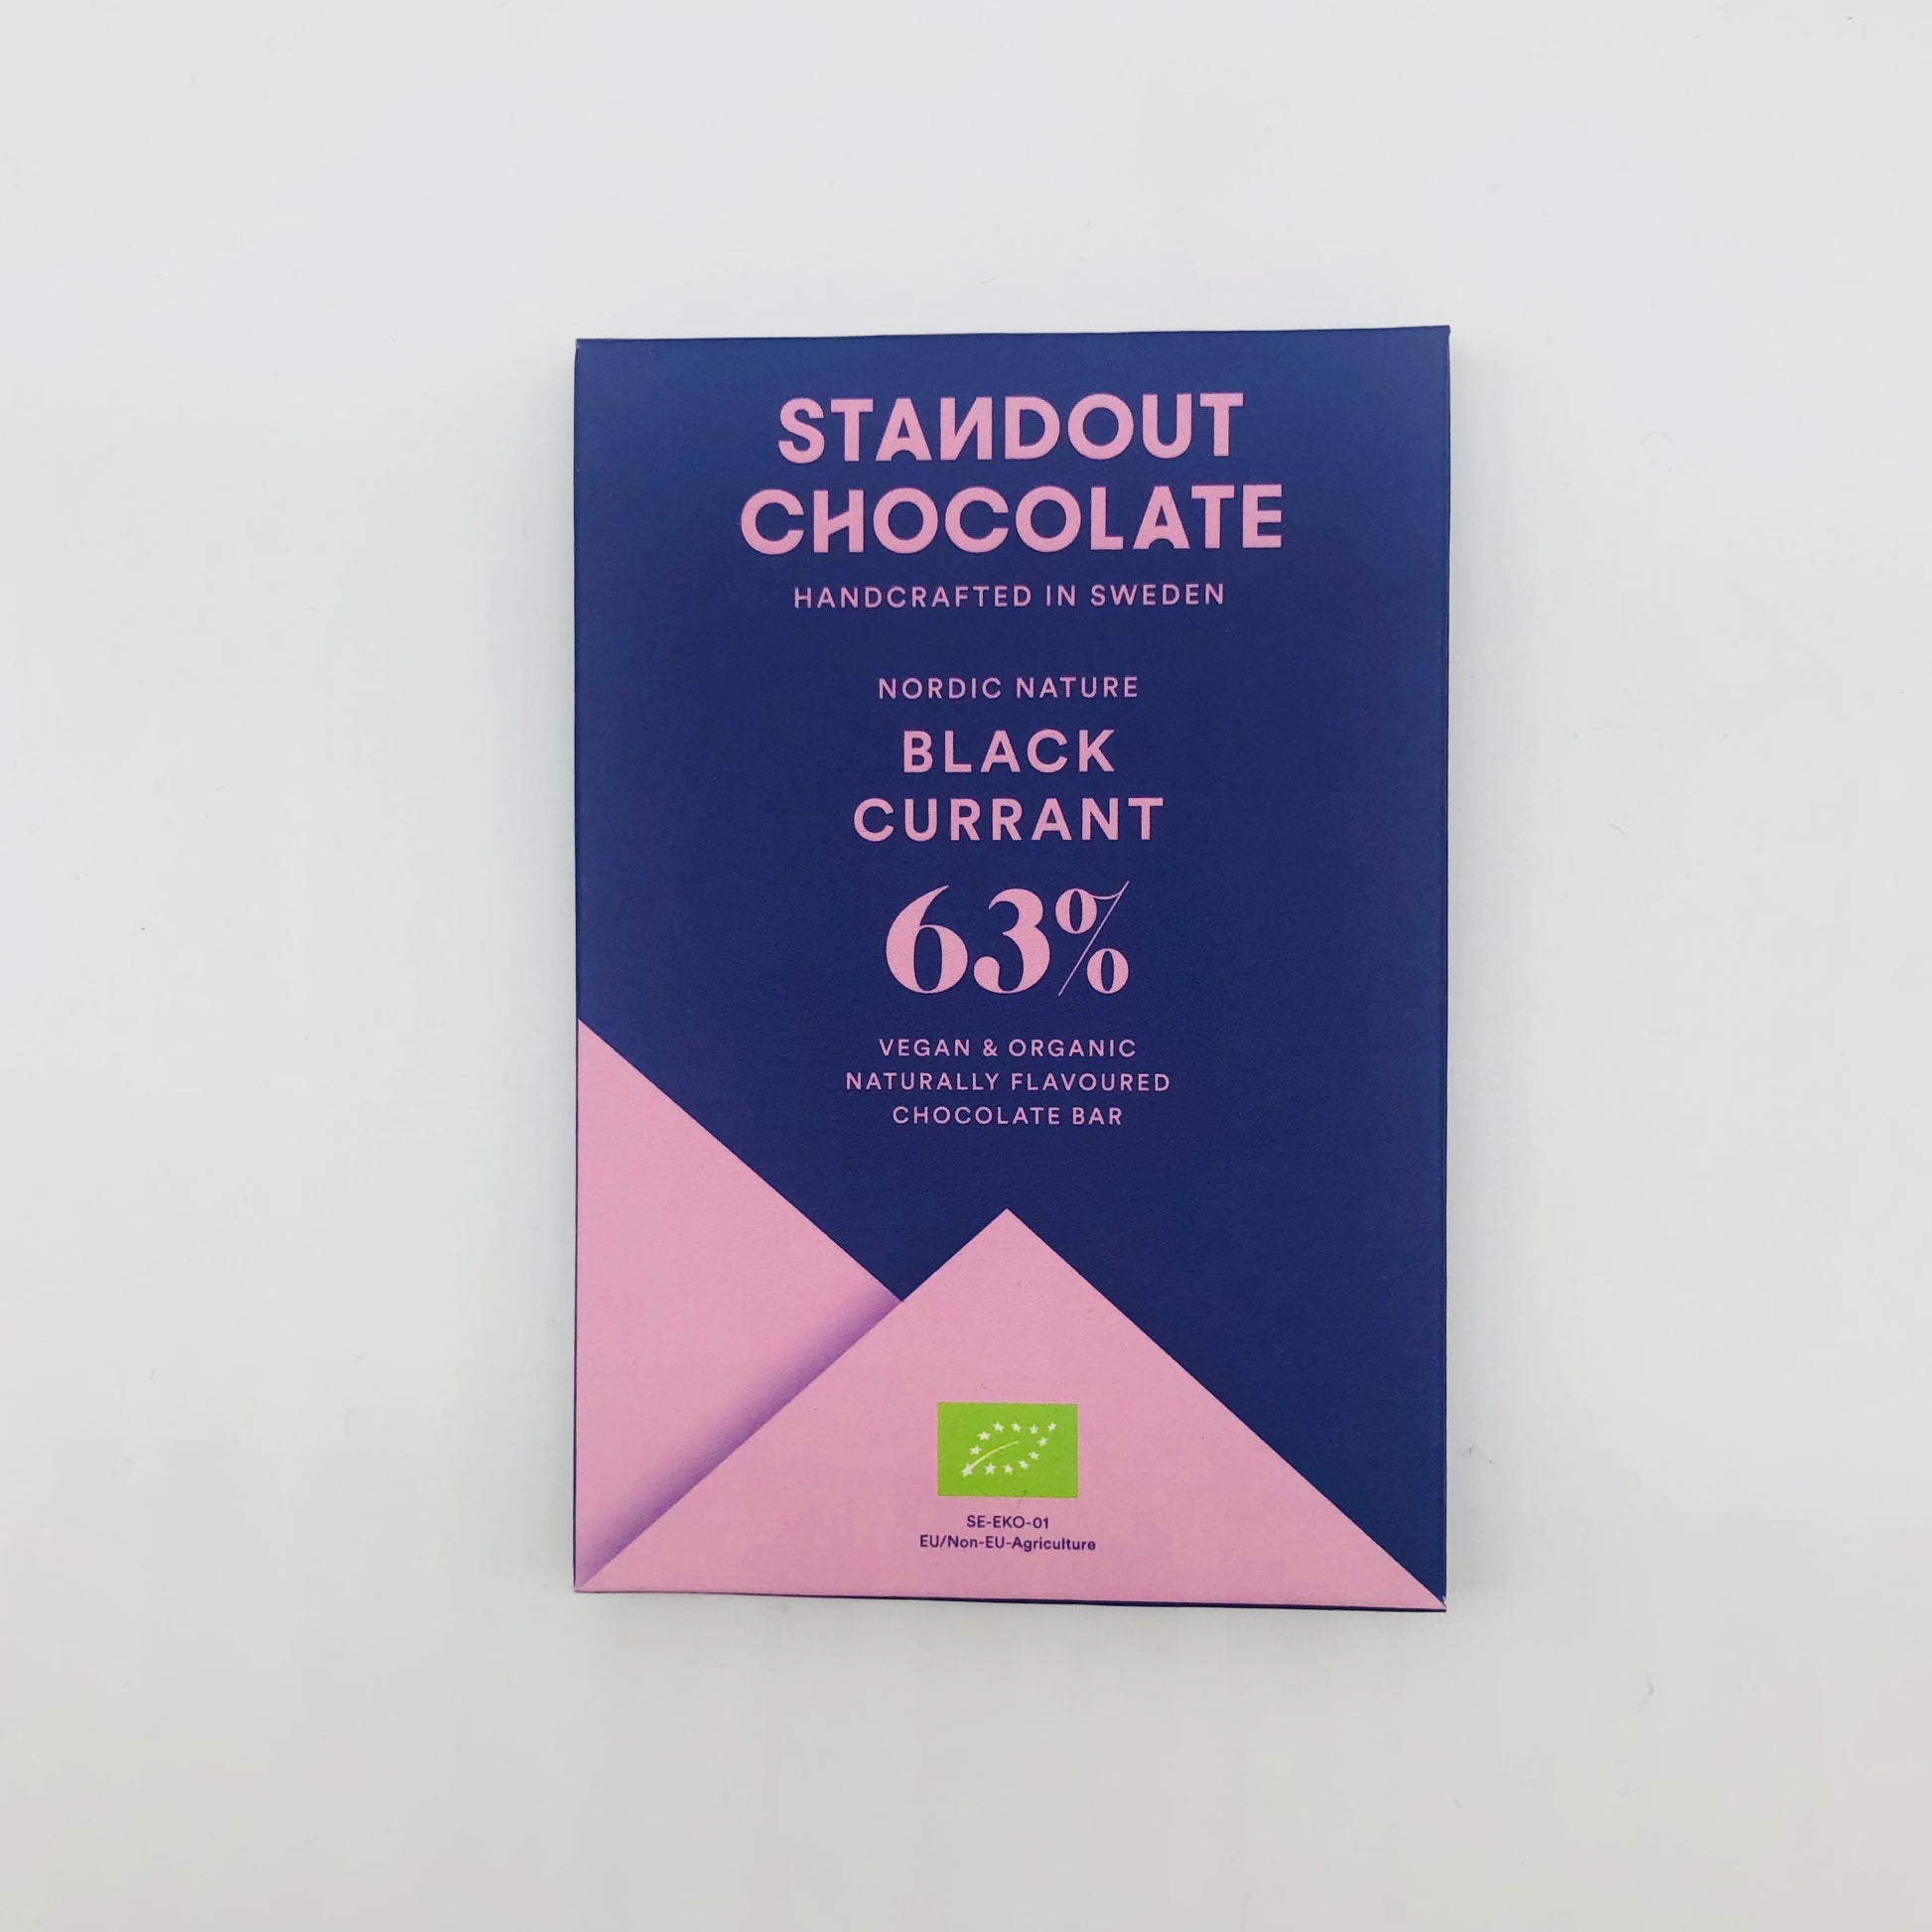 Standout Chocolate Nordic Nature Black Currant 63%